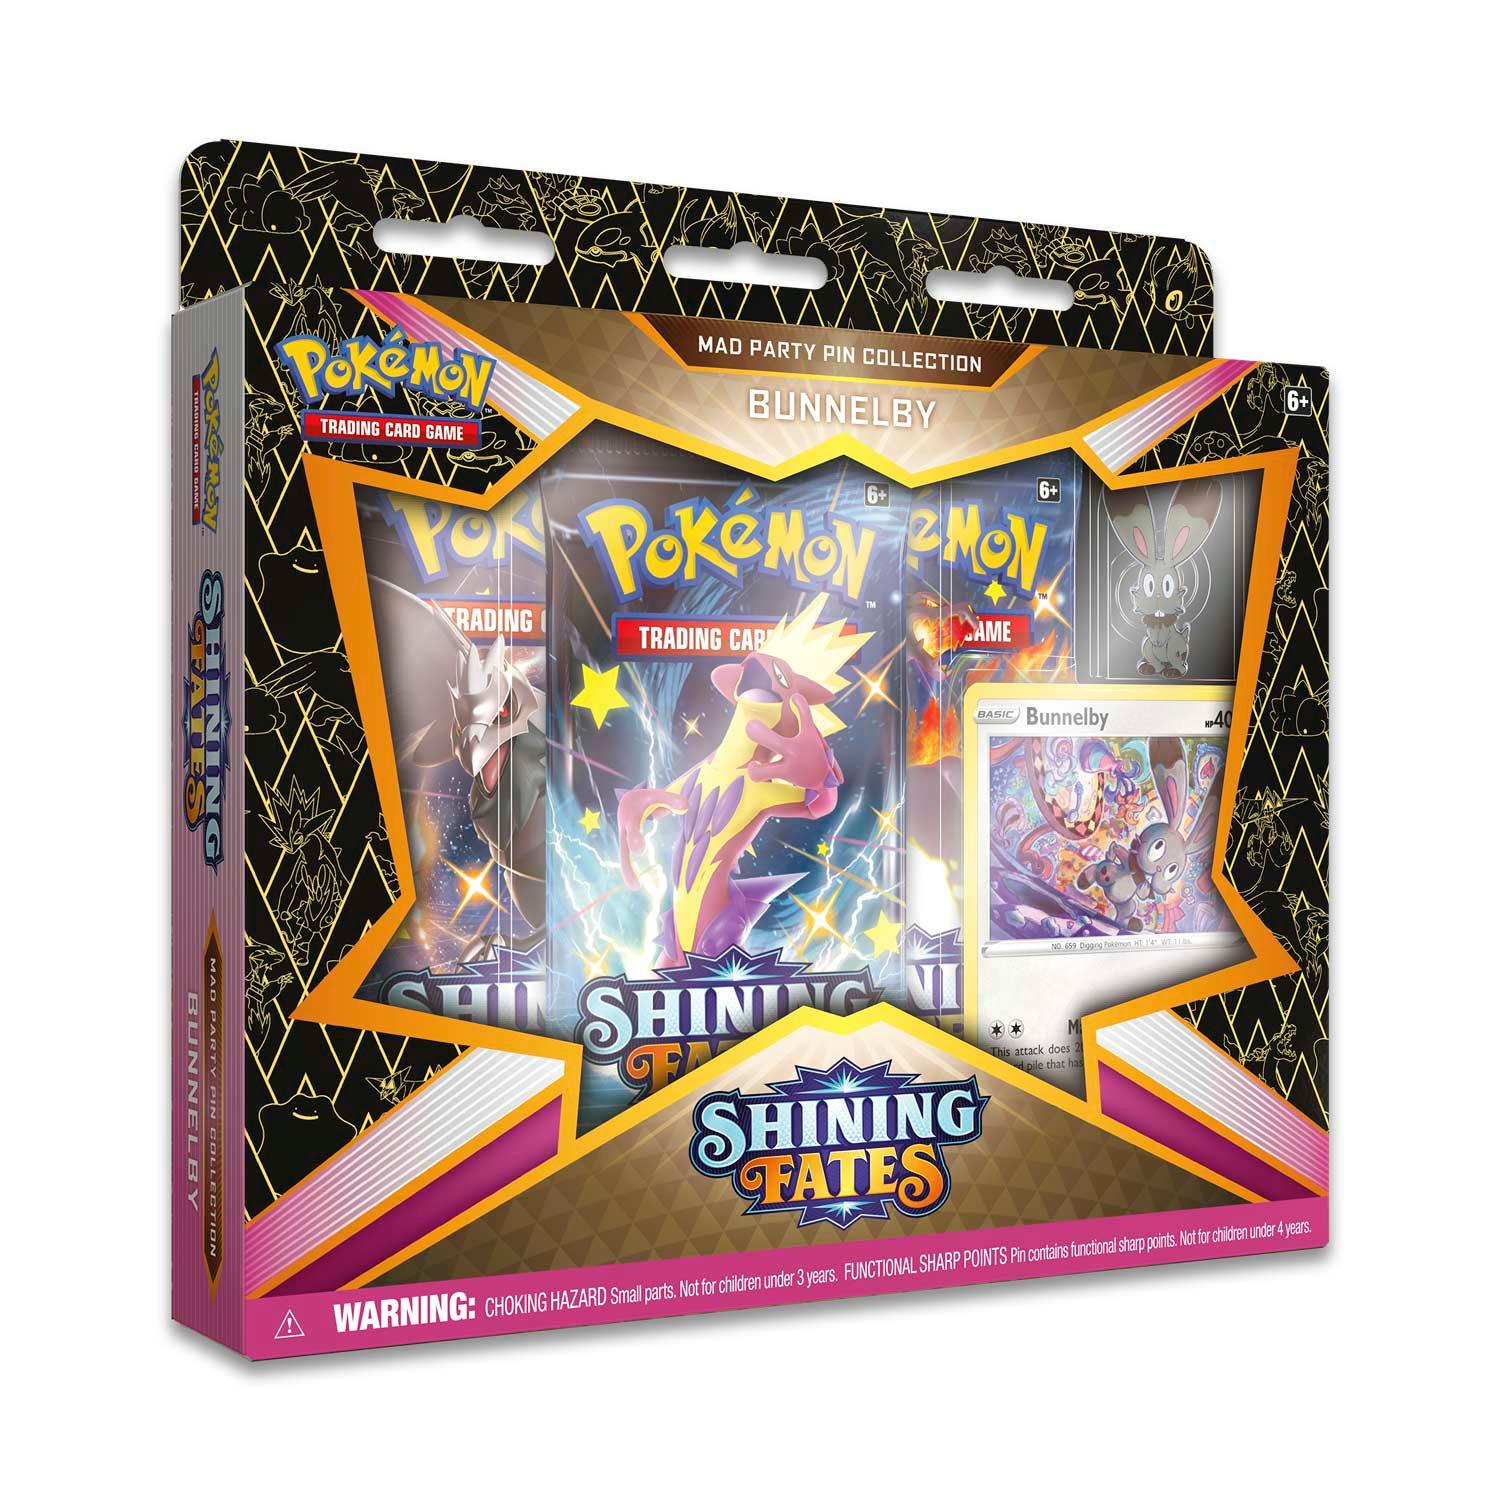 Pokemon Box - Mad Party Pin Collection - Shining Fates - Bunnelby Pin - Hobby Champion Inc